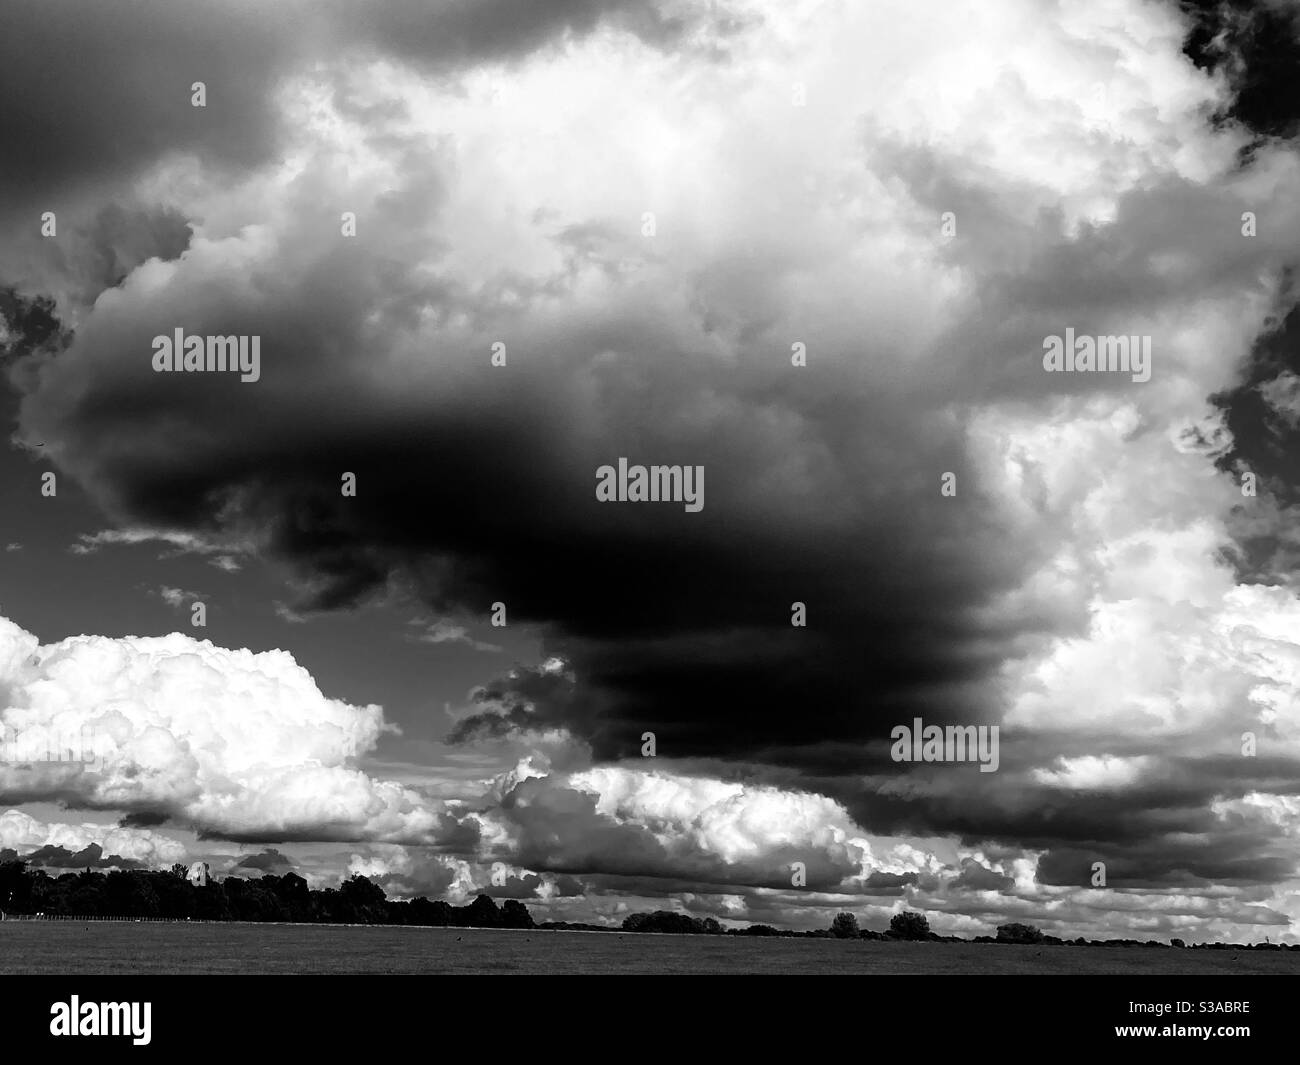 Stormy Weather, Black clouds, Dramatic. Stock Photo